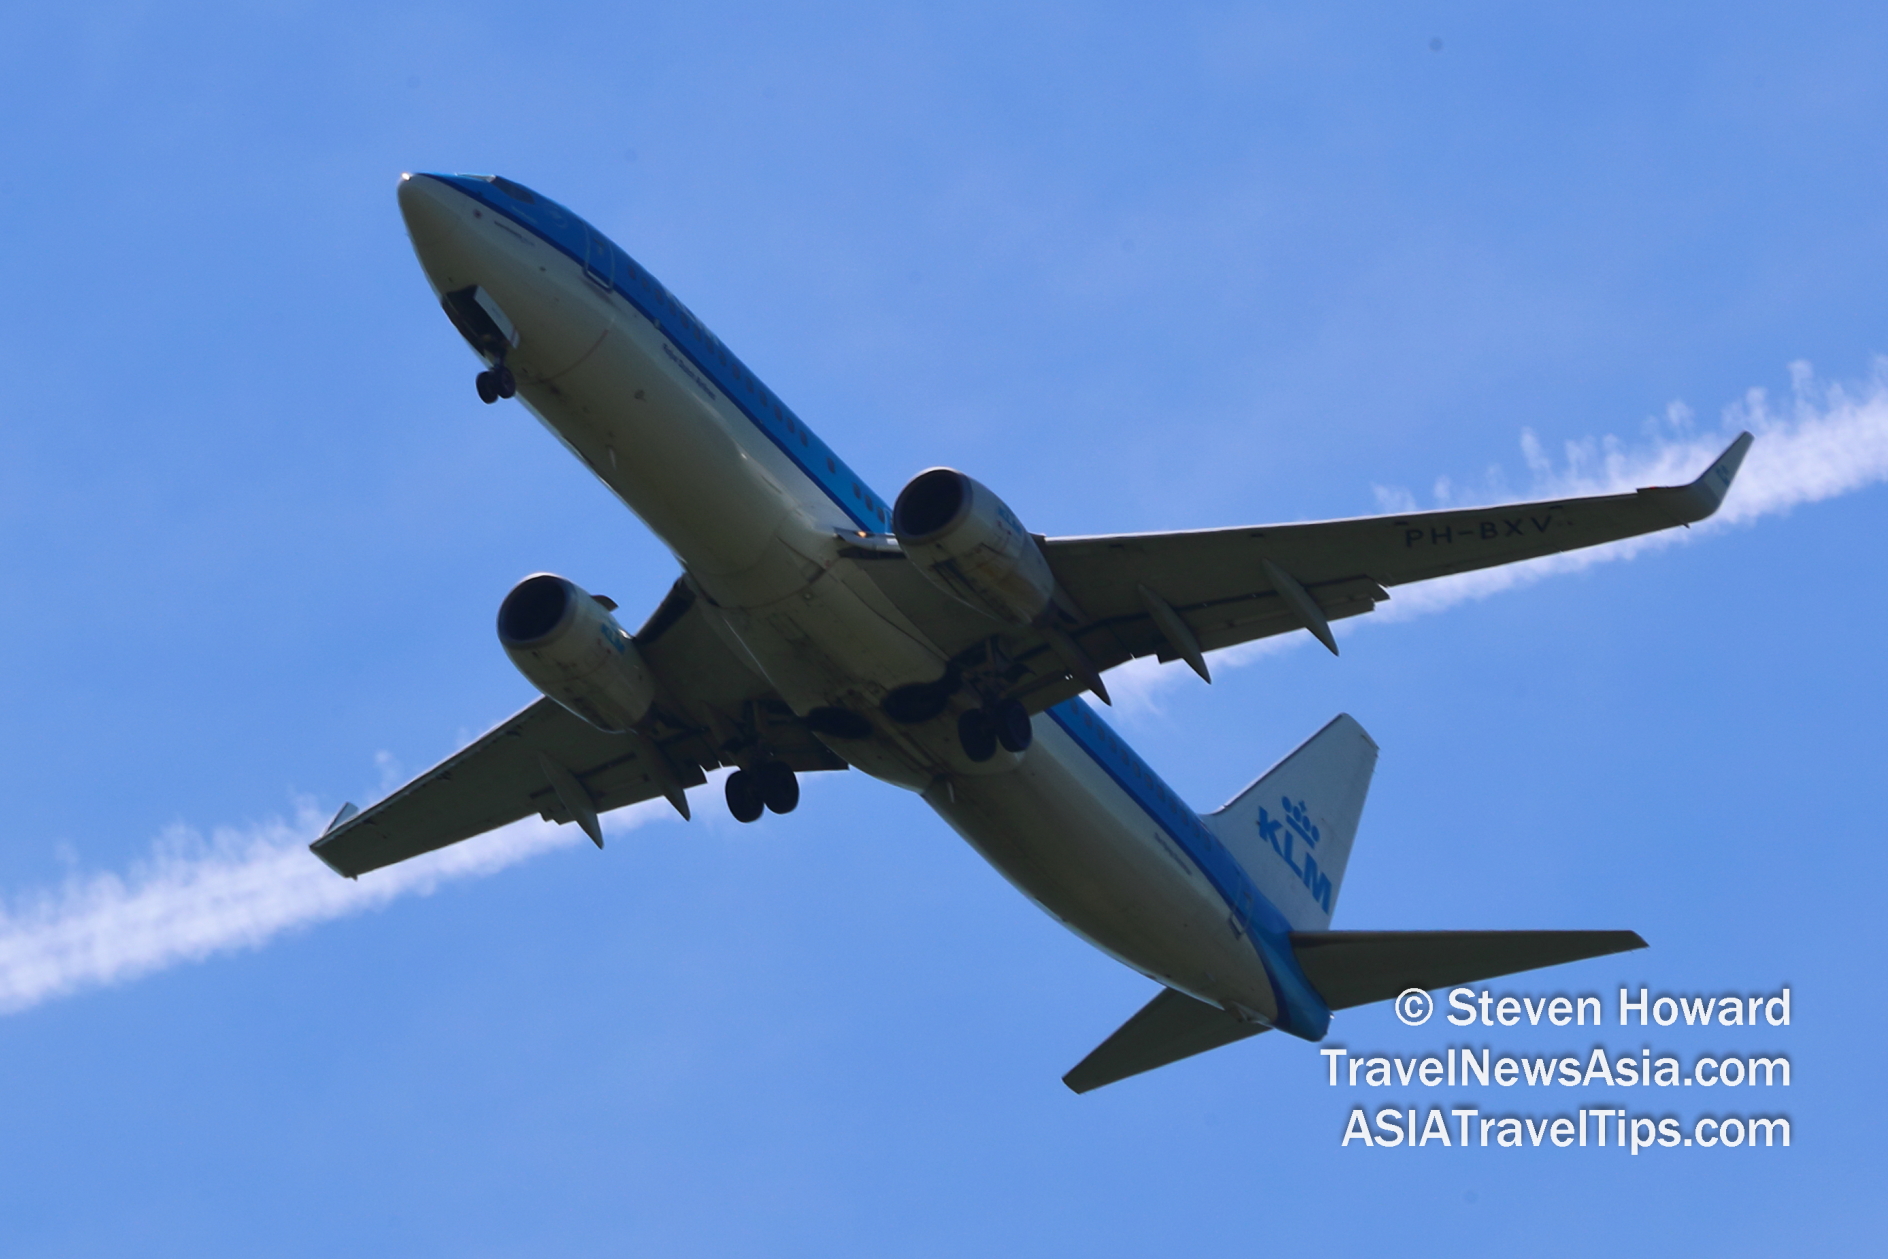 KLM Boeing 737 reg: PH-BXV. Picture by Steven Howard of TravelNewsAsia.com Click to enlarge.